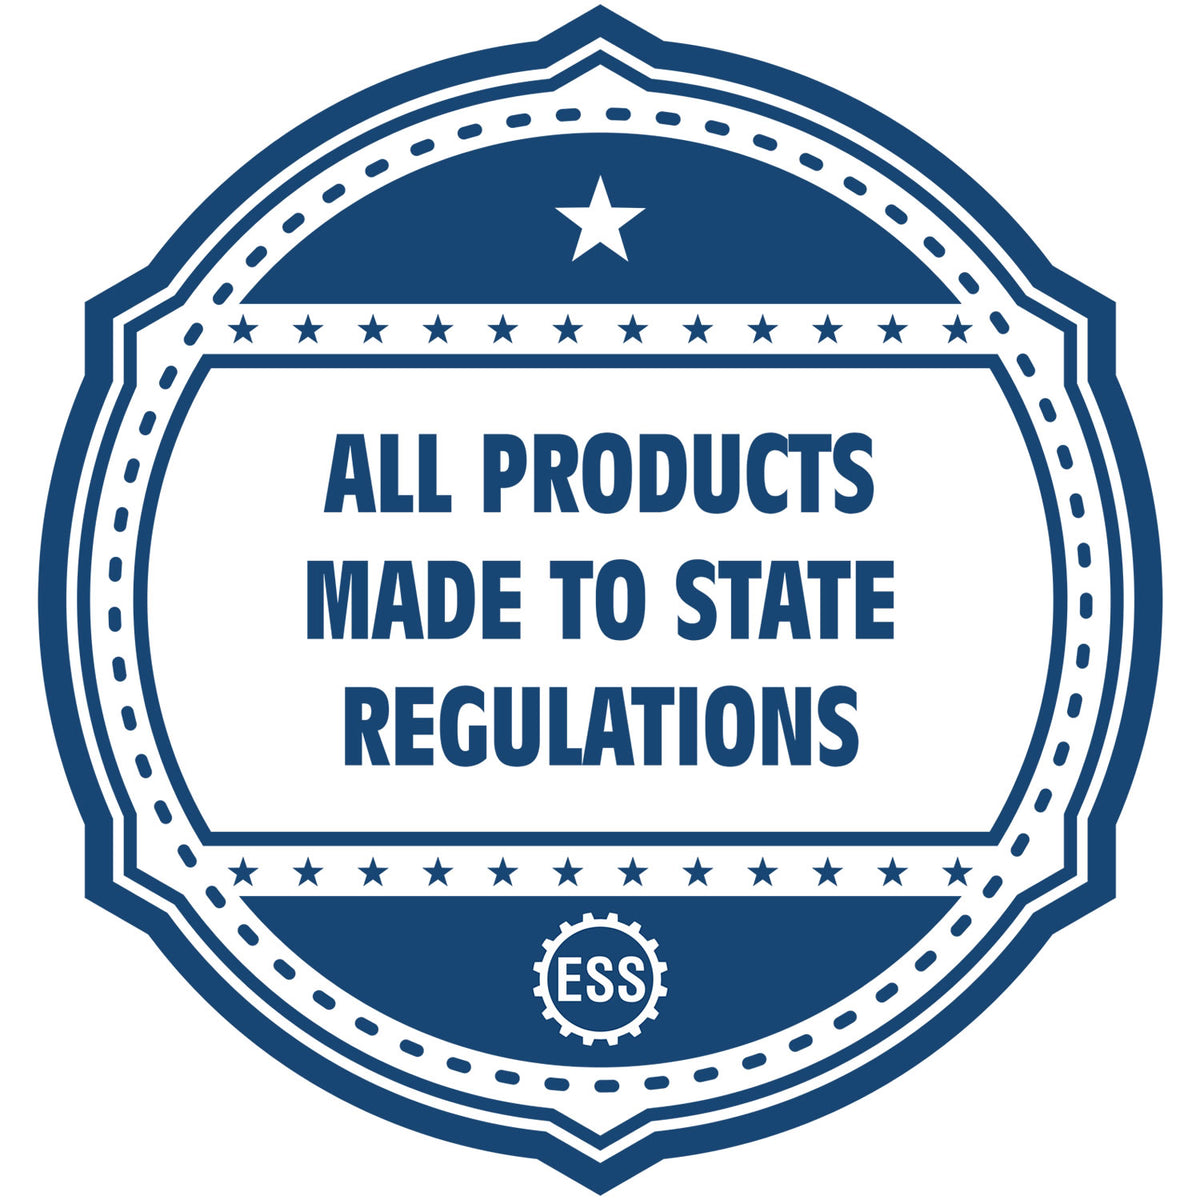 An icon or badge element for the Slim Pre-Inked Utah Land Surveyor Seal Stamp showing that this product is made in compliance with state regulations.